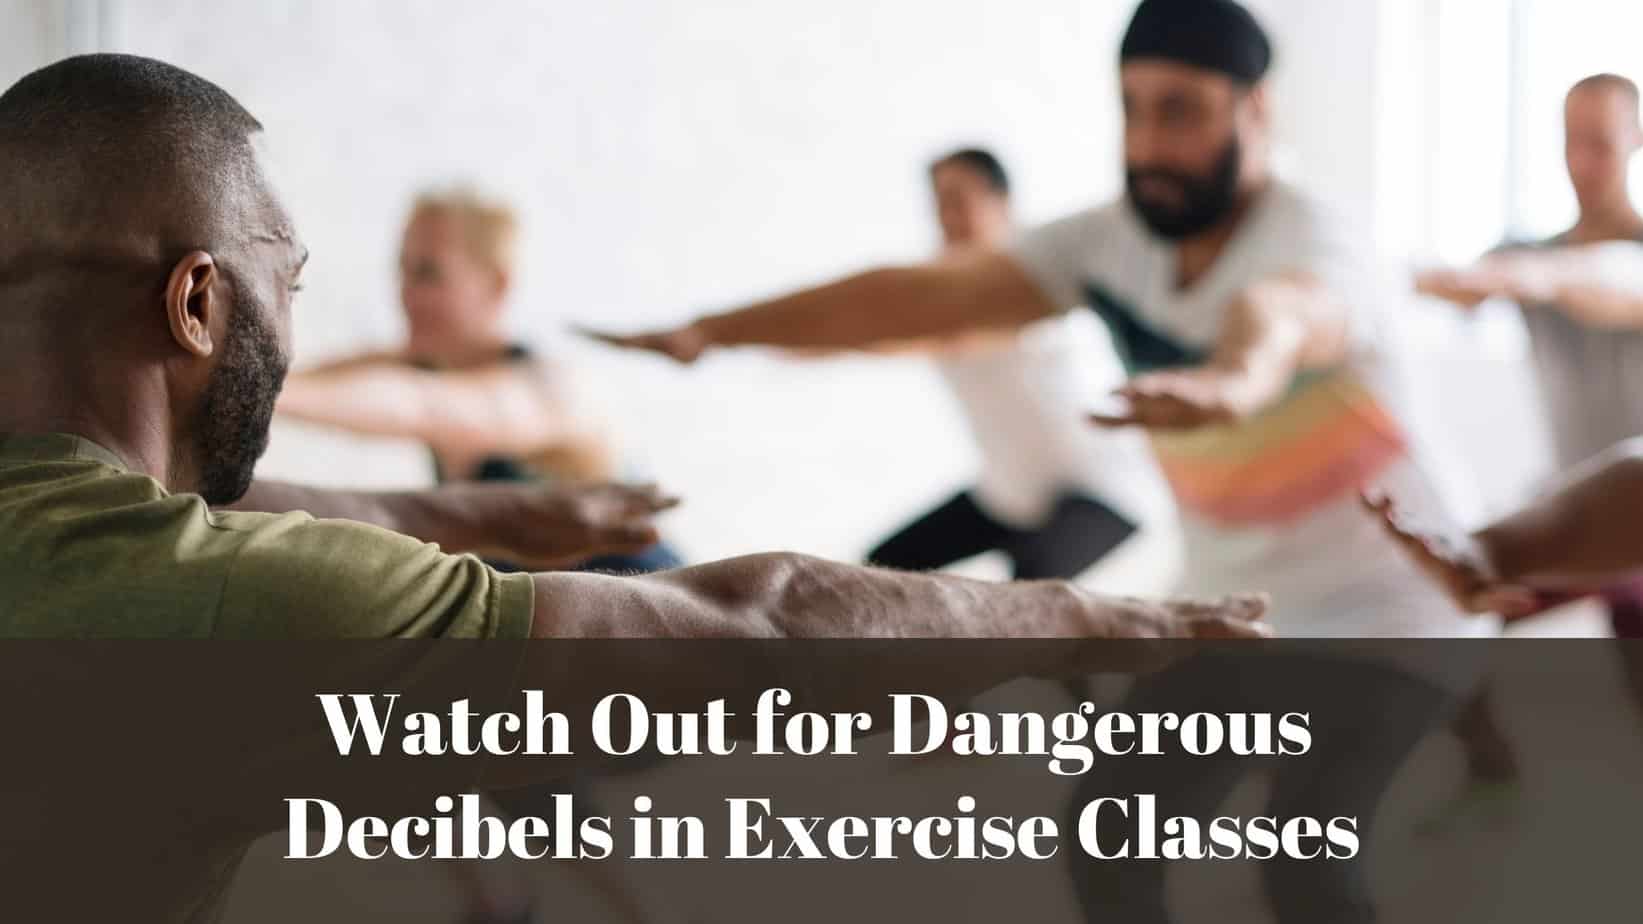 Watch Out for Dangerous Decibels in Exercise Classes